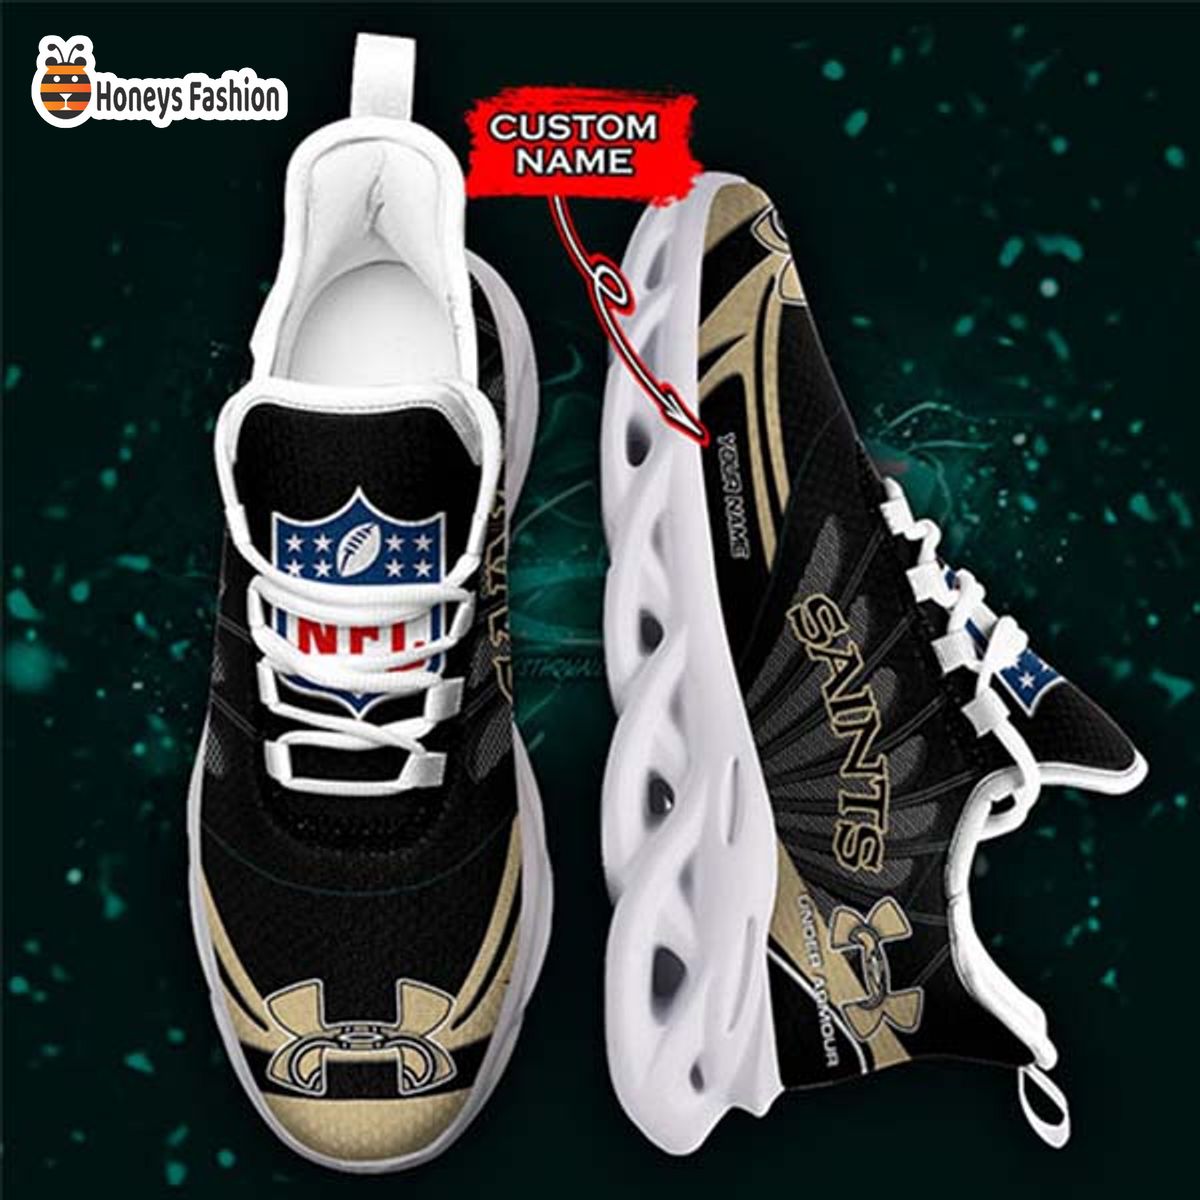 New Orleans Saints Under Armour Custom Name Max Soul Sneaker